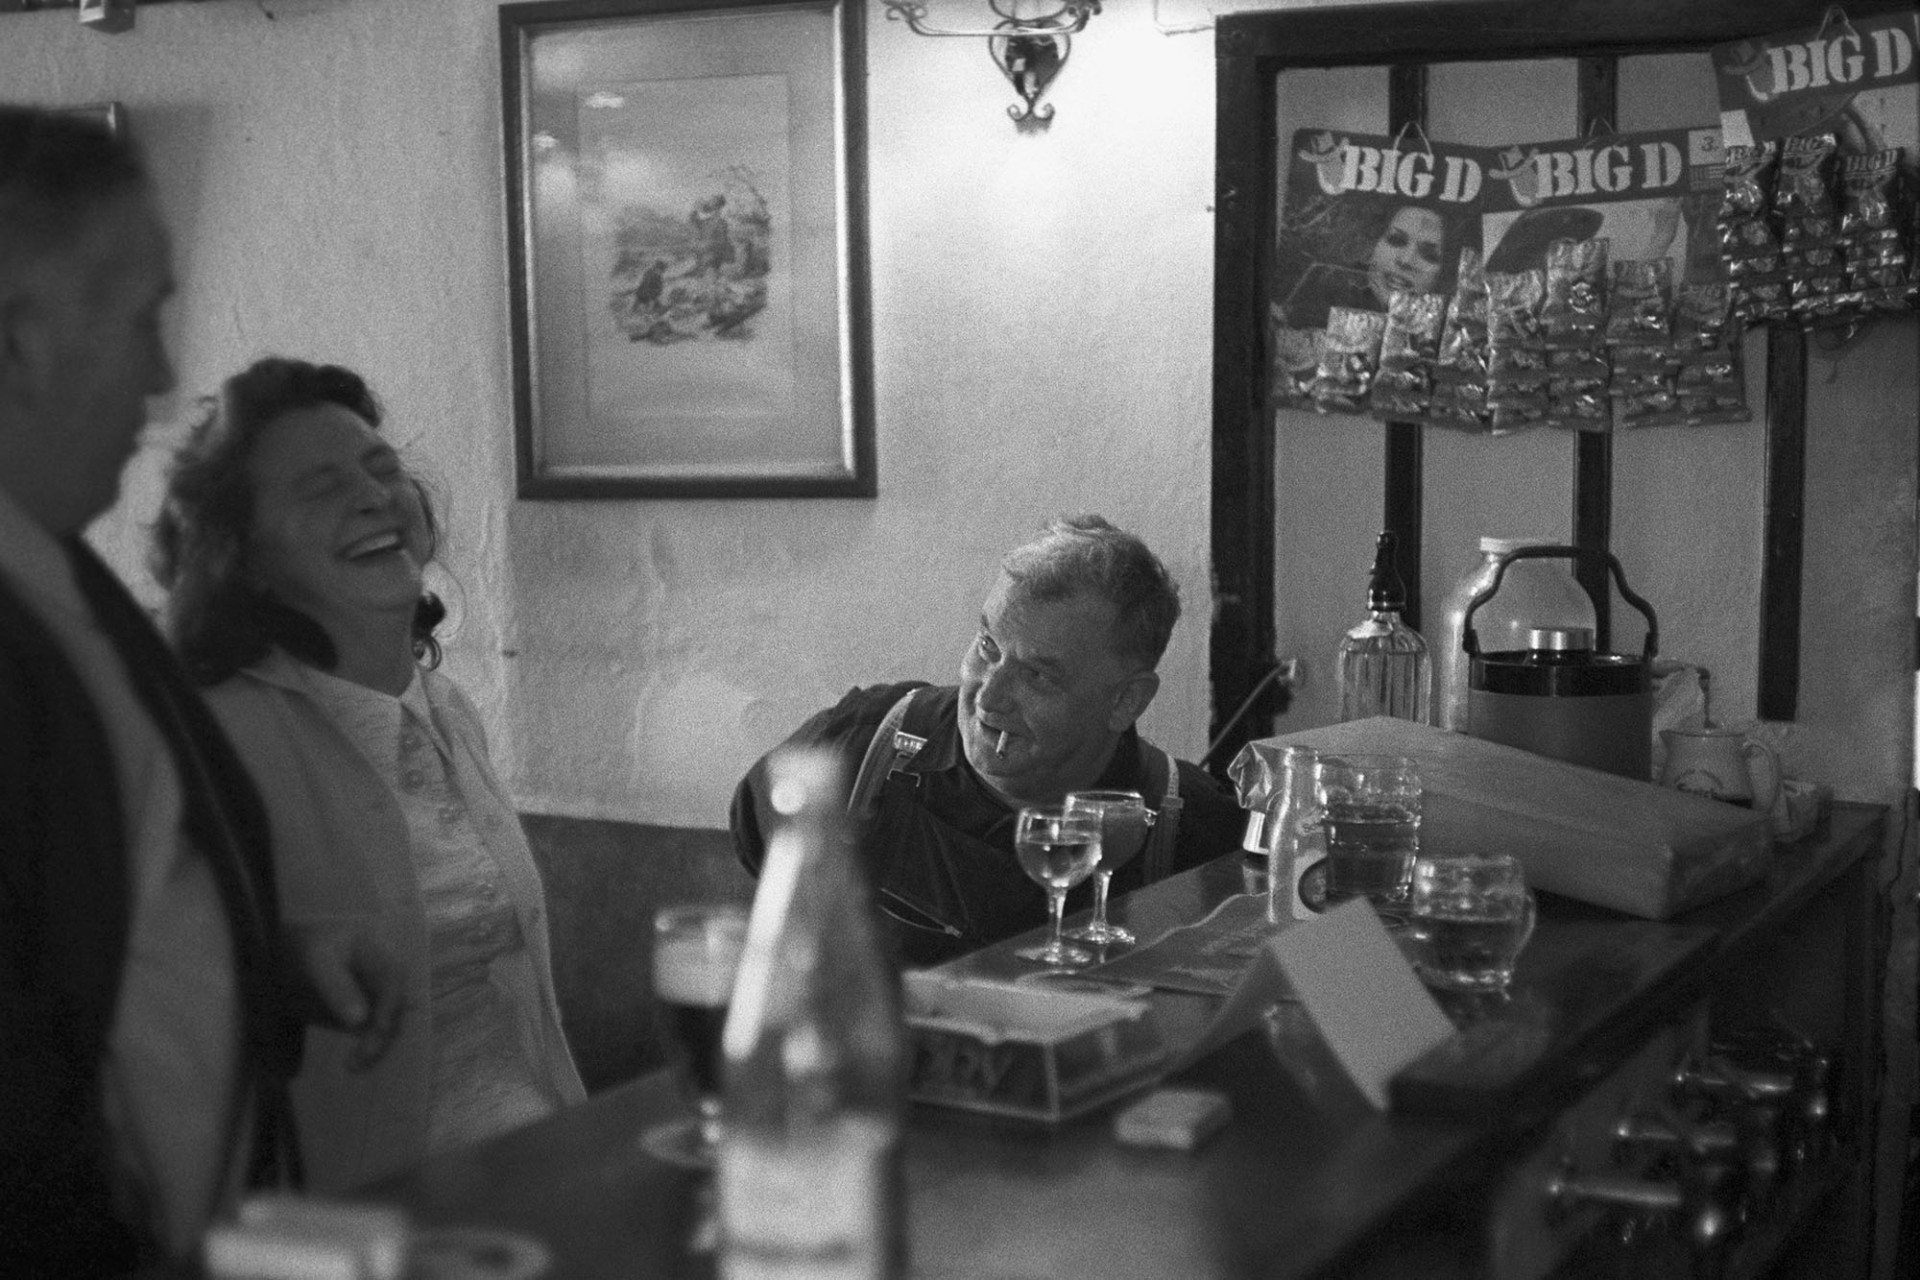 People enjoying a joke at the bar of The George.
[Two men and a woman laughing and drinking at the bar of The George in Hatherleigh. One man is smoking a cigarette and glasses of wine and a pint glass are on the bar.]